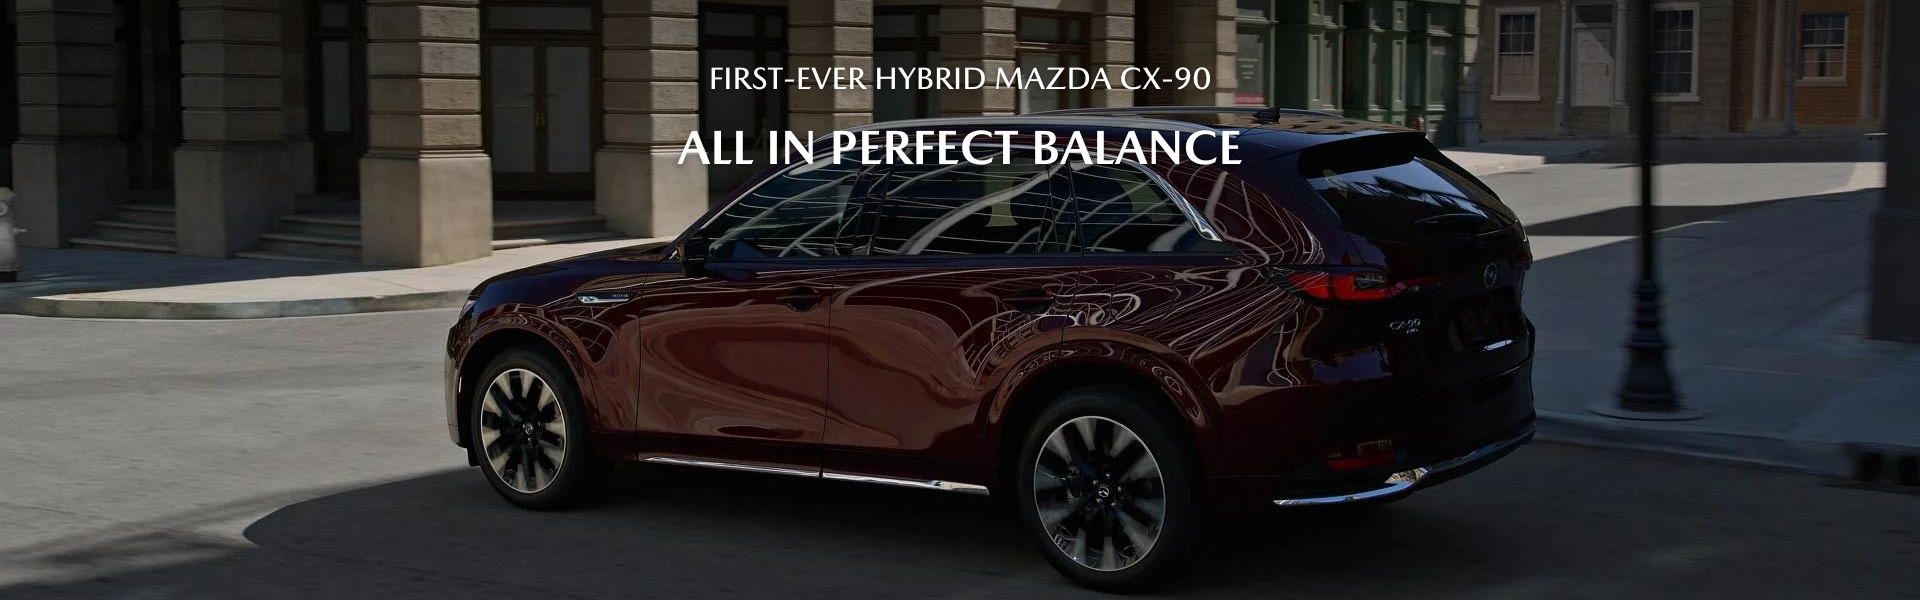 FIRST-EVER HYBRID MAZDA CX-90 ALL IN PERECT BALANCE